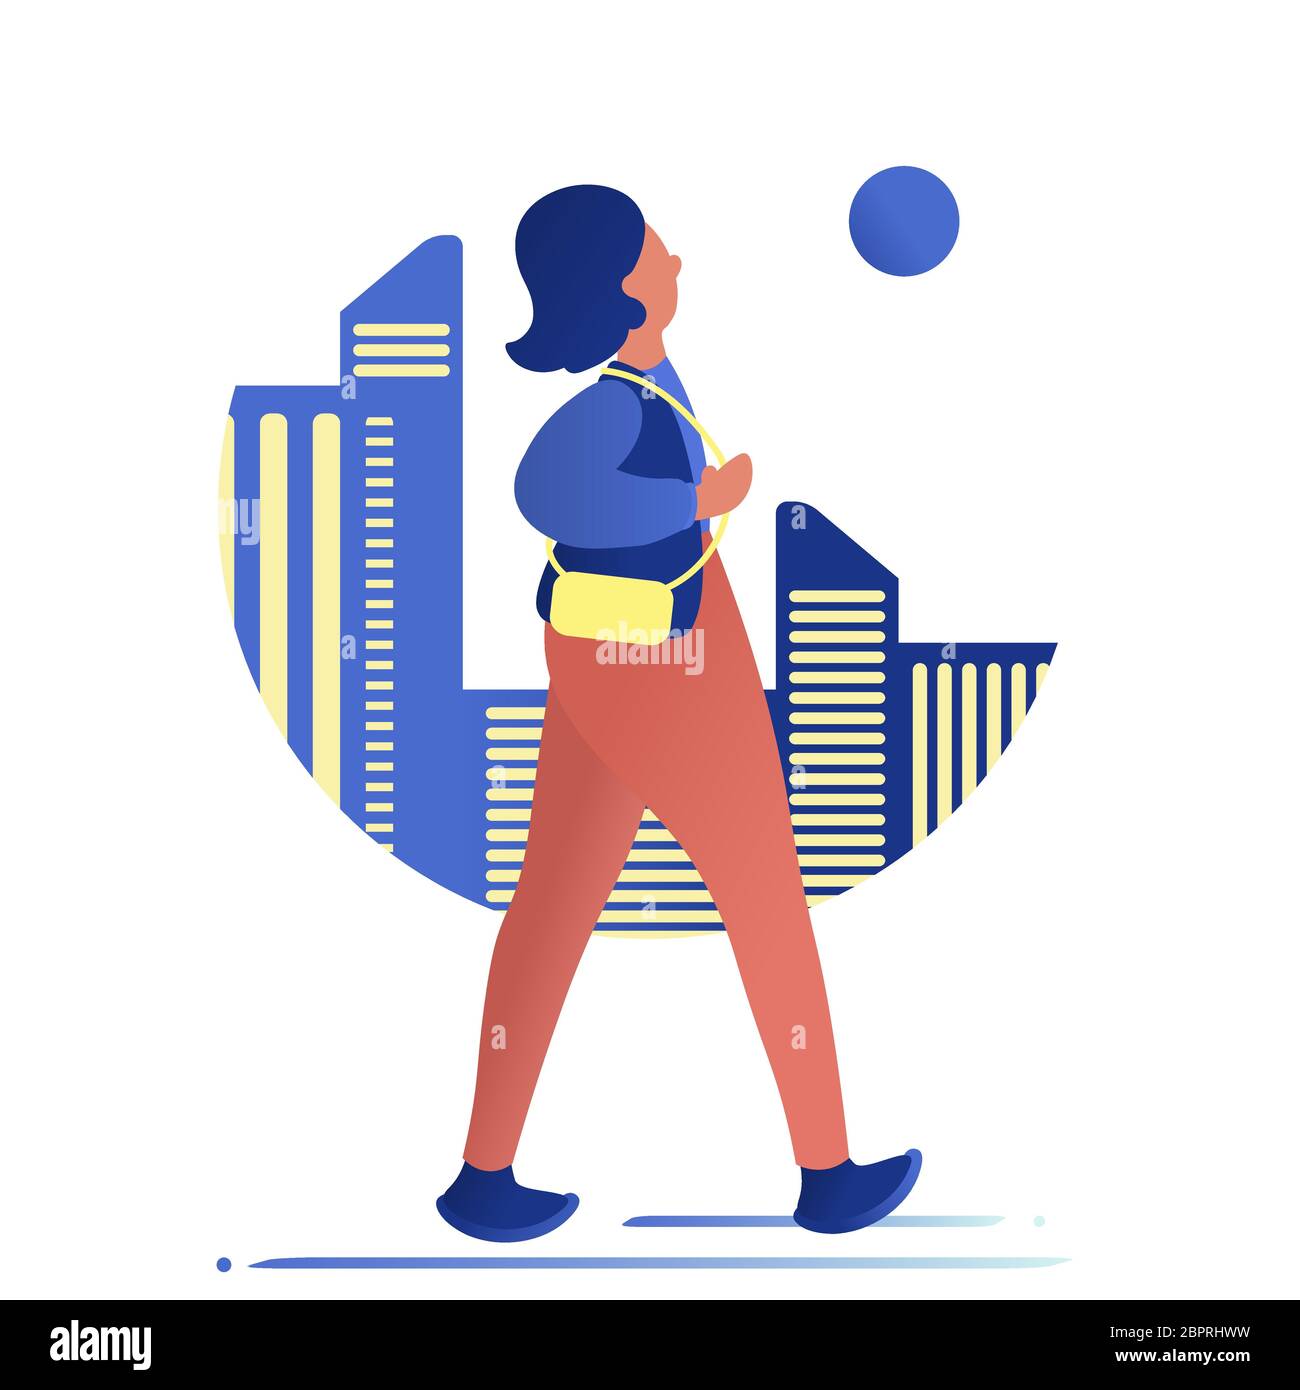 Woman with long legs walking in the city. Vetor illustration in blue red and yellow color Stock Vector